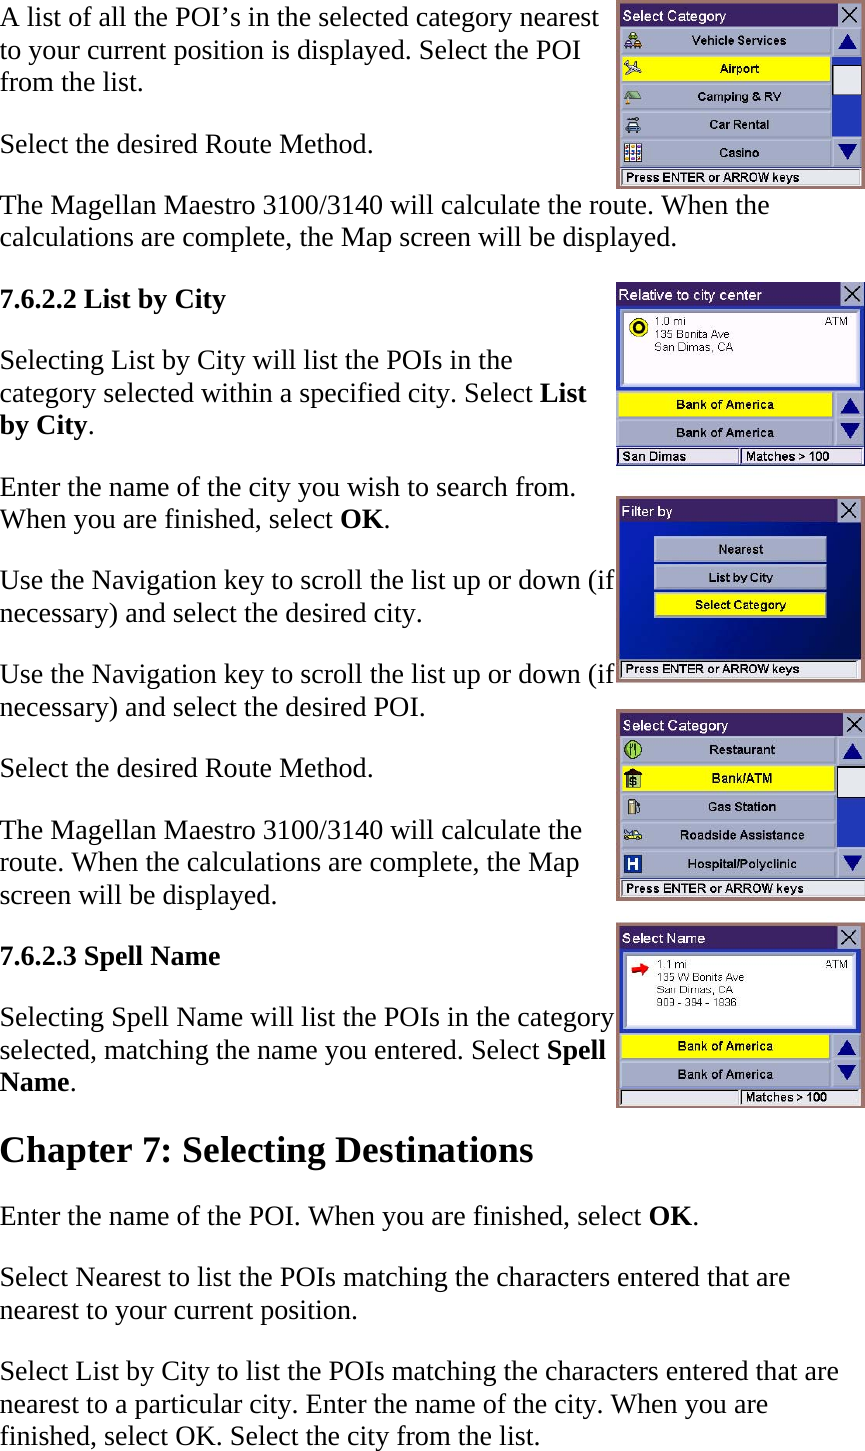 A list of all the POI’s in the selected category nearest to your current position is displayed. Select the POI from the list.  Select the desired Route Method.  The Magellan Maestro 3100/3140 will calculate the route. When the calculations are complete, the Map screen will be displayed.  7.6.2.2 List by City  Selecting List by City will list the POIs in the category selected within a specified city. Select List by City.  Enter the name of the city you wish to search from. When you are finished, select OK.  Use the Navigation key to scroll the list up or down (if necessary) and select the desired city.  Use the Navigation key to scroll the list up or down (if necessary) and select the desired POI.  Select the desired Route Method.  The Magellan Maestro 3100/3140 will calculate the route. When the calculations are complete, the Map screen will be displayed.  7.6.2.3 Spell Name  Selecting Spell Name will list the POIs in the category selected, matching the name you entered. Select Spell Name.  Chapter 7: Selecting Destinations  Enter the name of the POI. When you are finished, select OK.  Select Nearest to list the POIs matching the characters entered that are nearest to your current position.  Select List by City to list the POIs matching the characters entered that are nearest to a particular city. Enter the name of the city. When you are finished, select OK. Select the city from the list.  